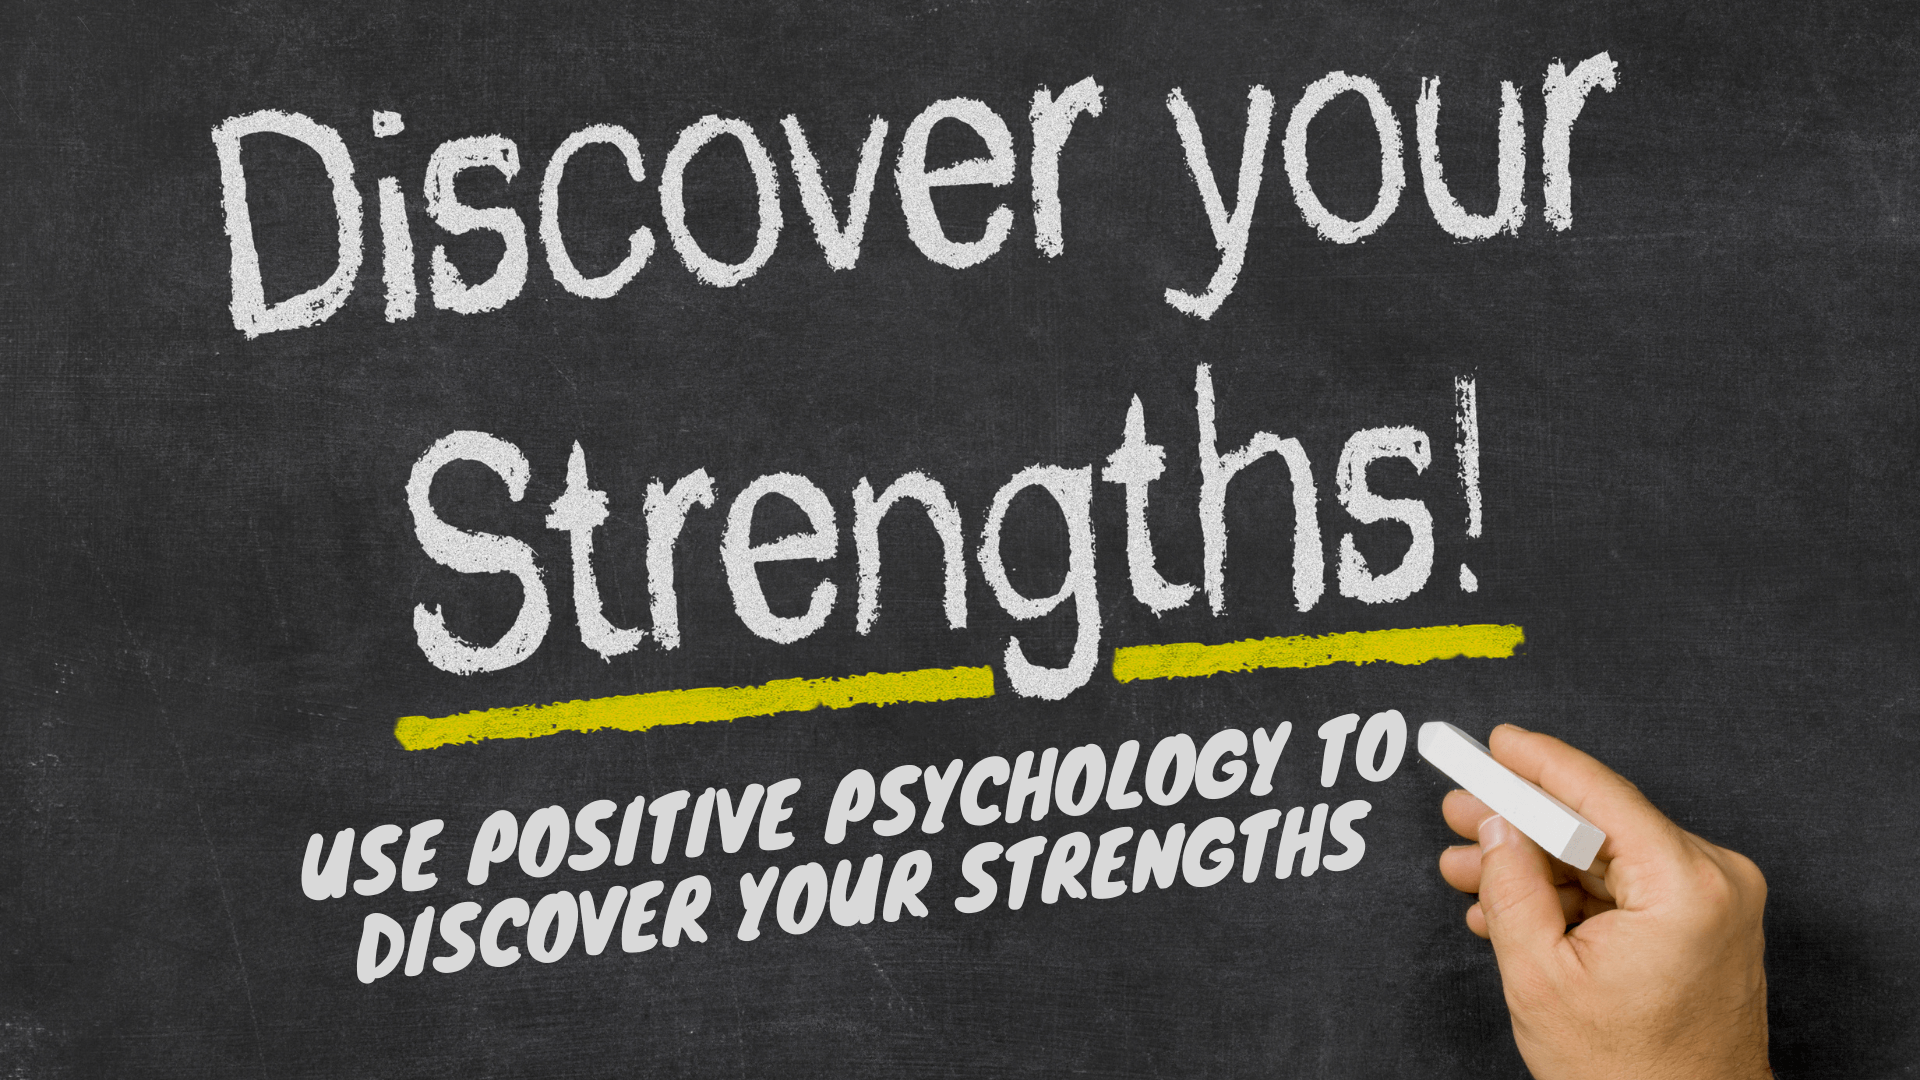 Positive Psychology Changed my life -How knowing my values and strengths changed my career and life?